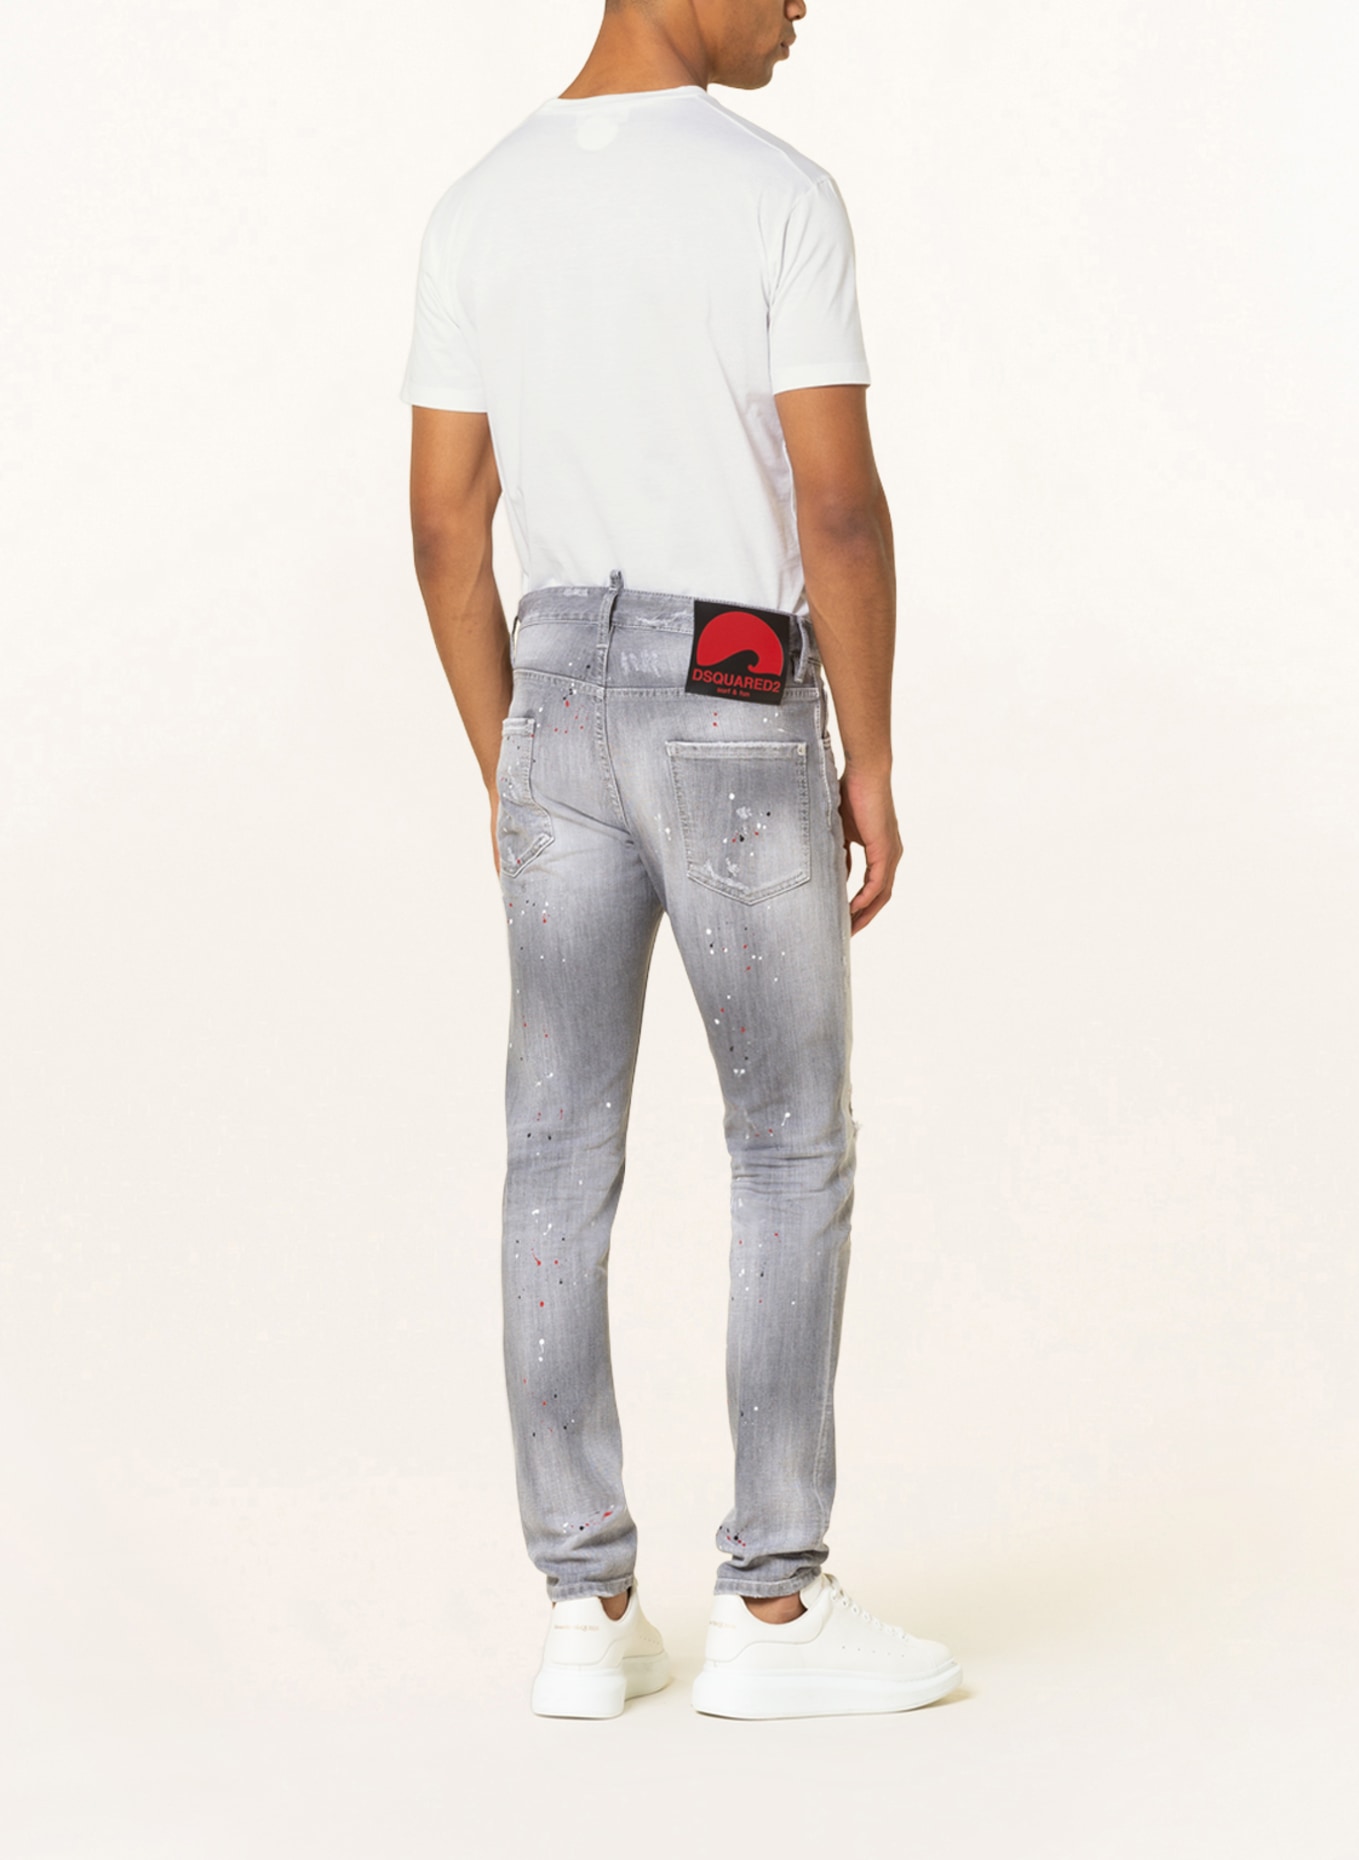 DSQUARED2 Destroyed Jeans COOL GUY Extra Slim Fit , Farbe: 852 LIGHT GREY (Bild 3)